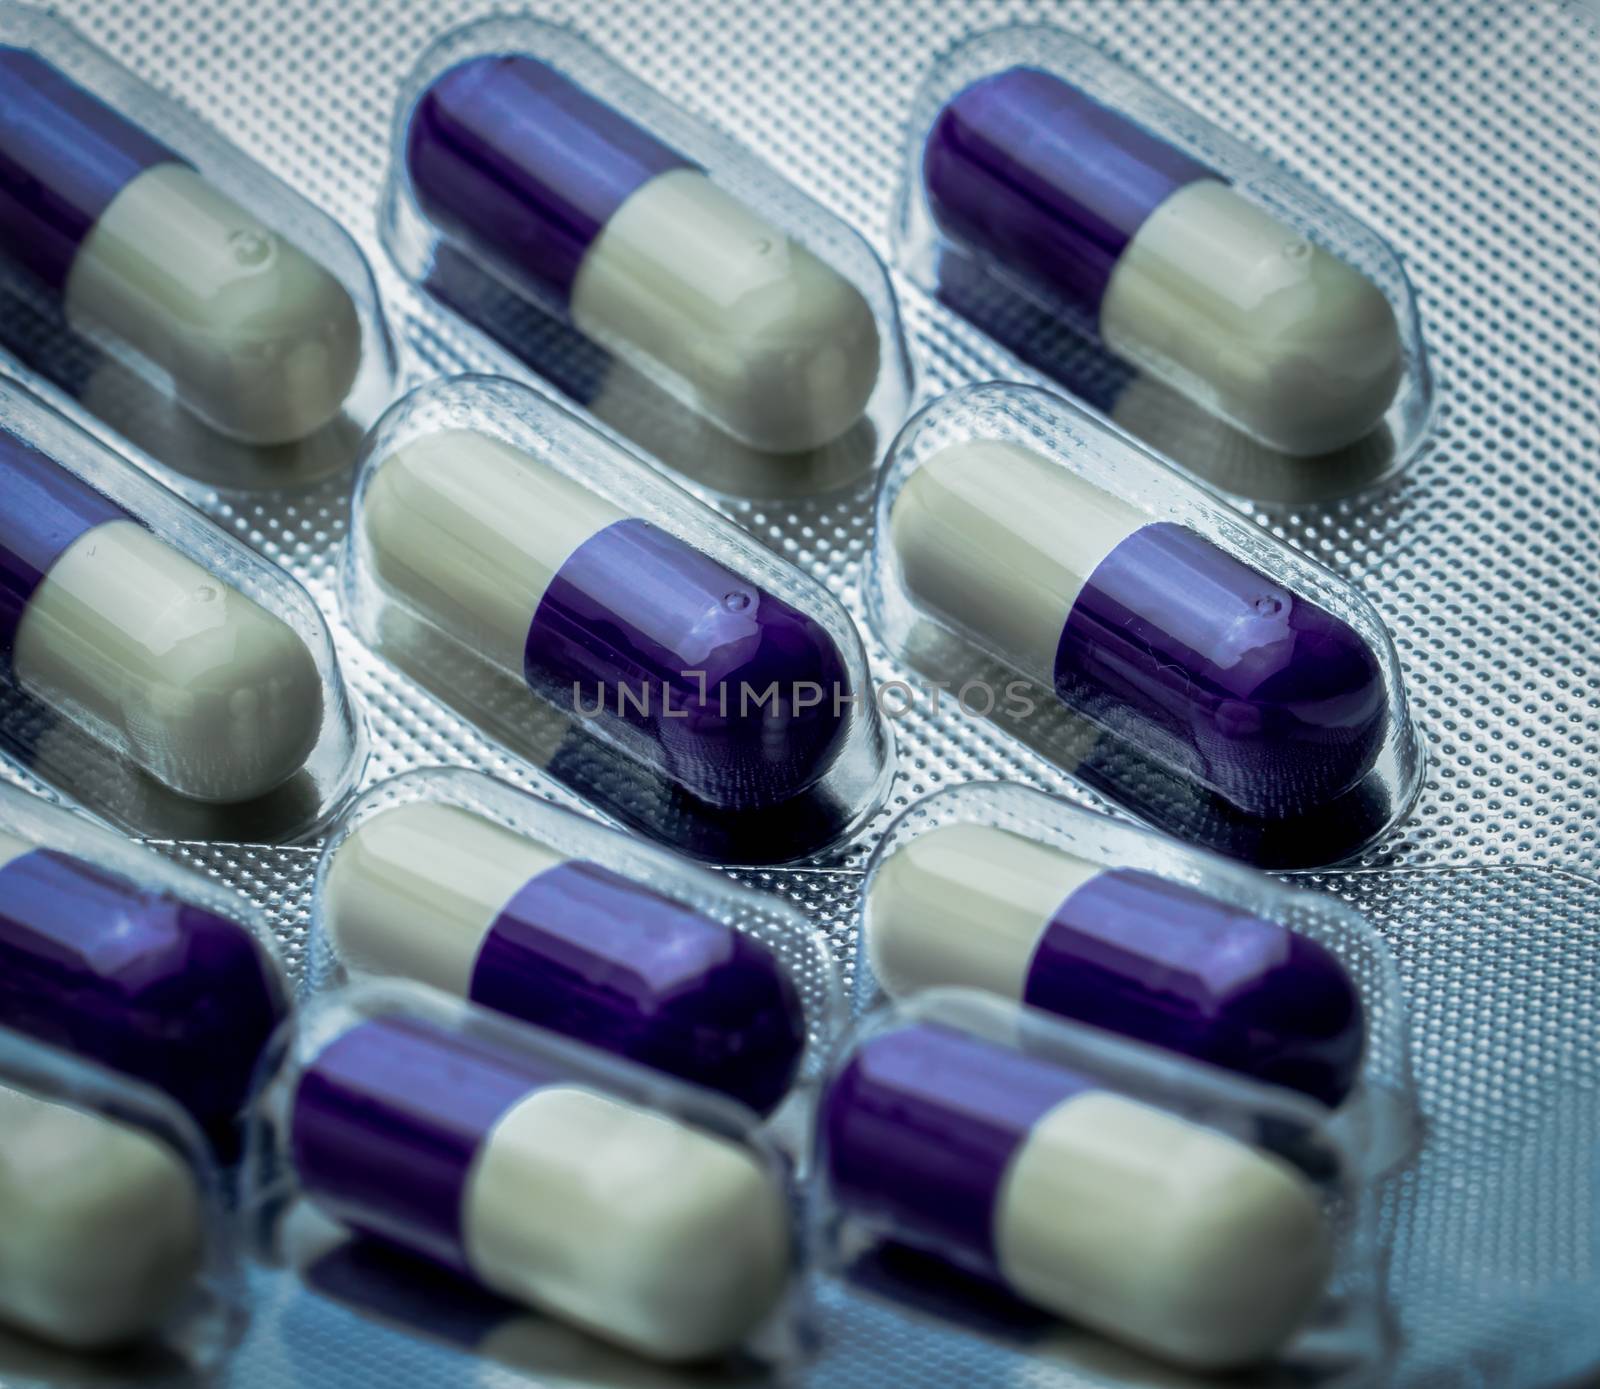 Fluconazole : Antifungal medicine. Full frame picture of purple, white capsule pills. Healthcare concept. Medicine pills can cause liver damage. Pharmaceutical industry background. by Fahroni